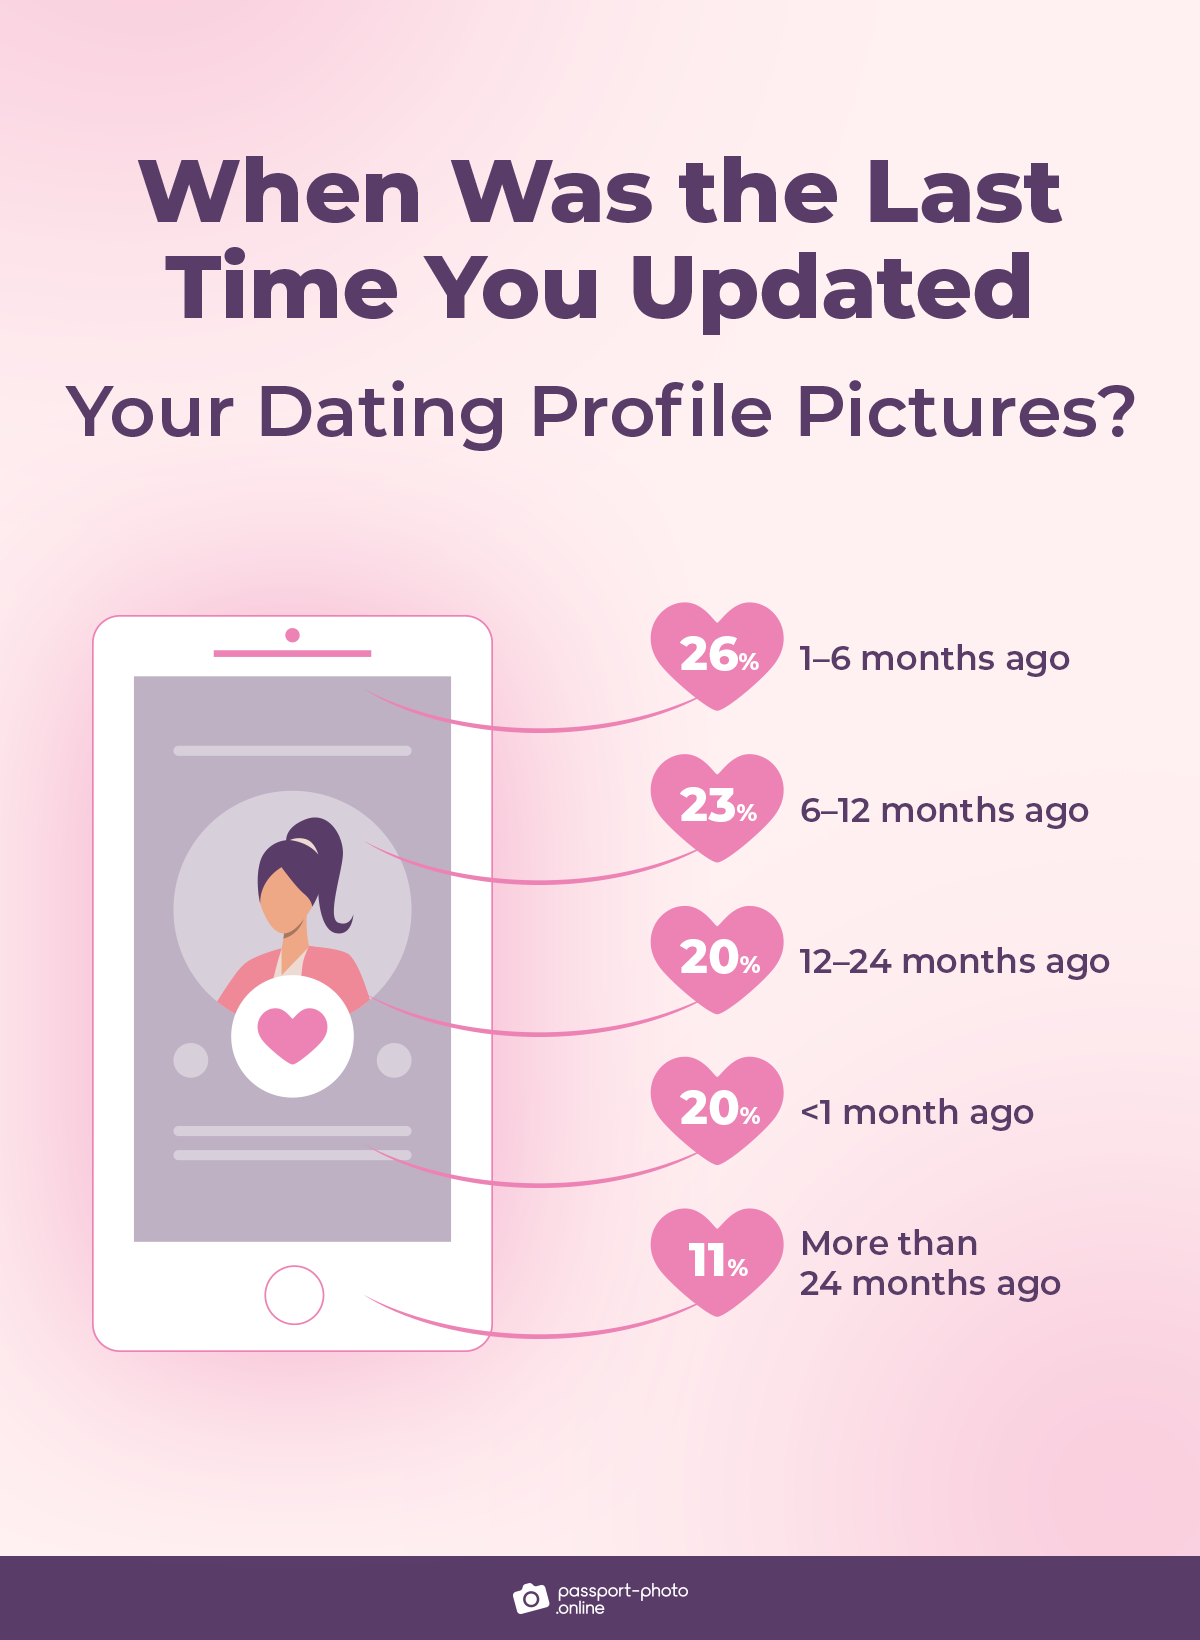 last time US dating app users updated profile pictures